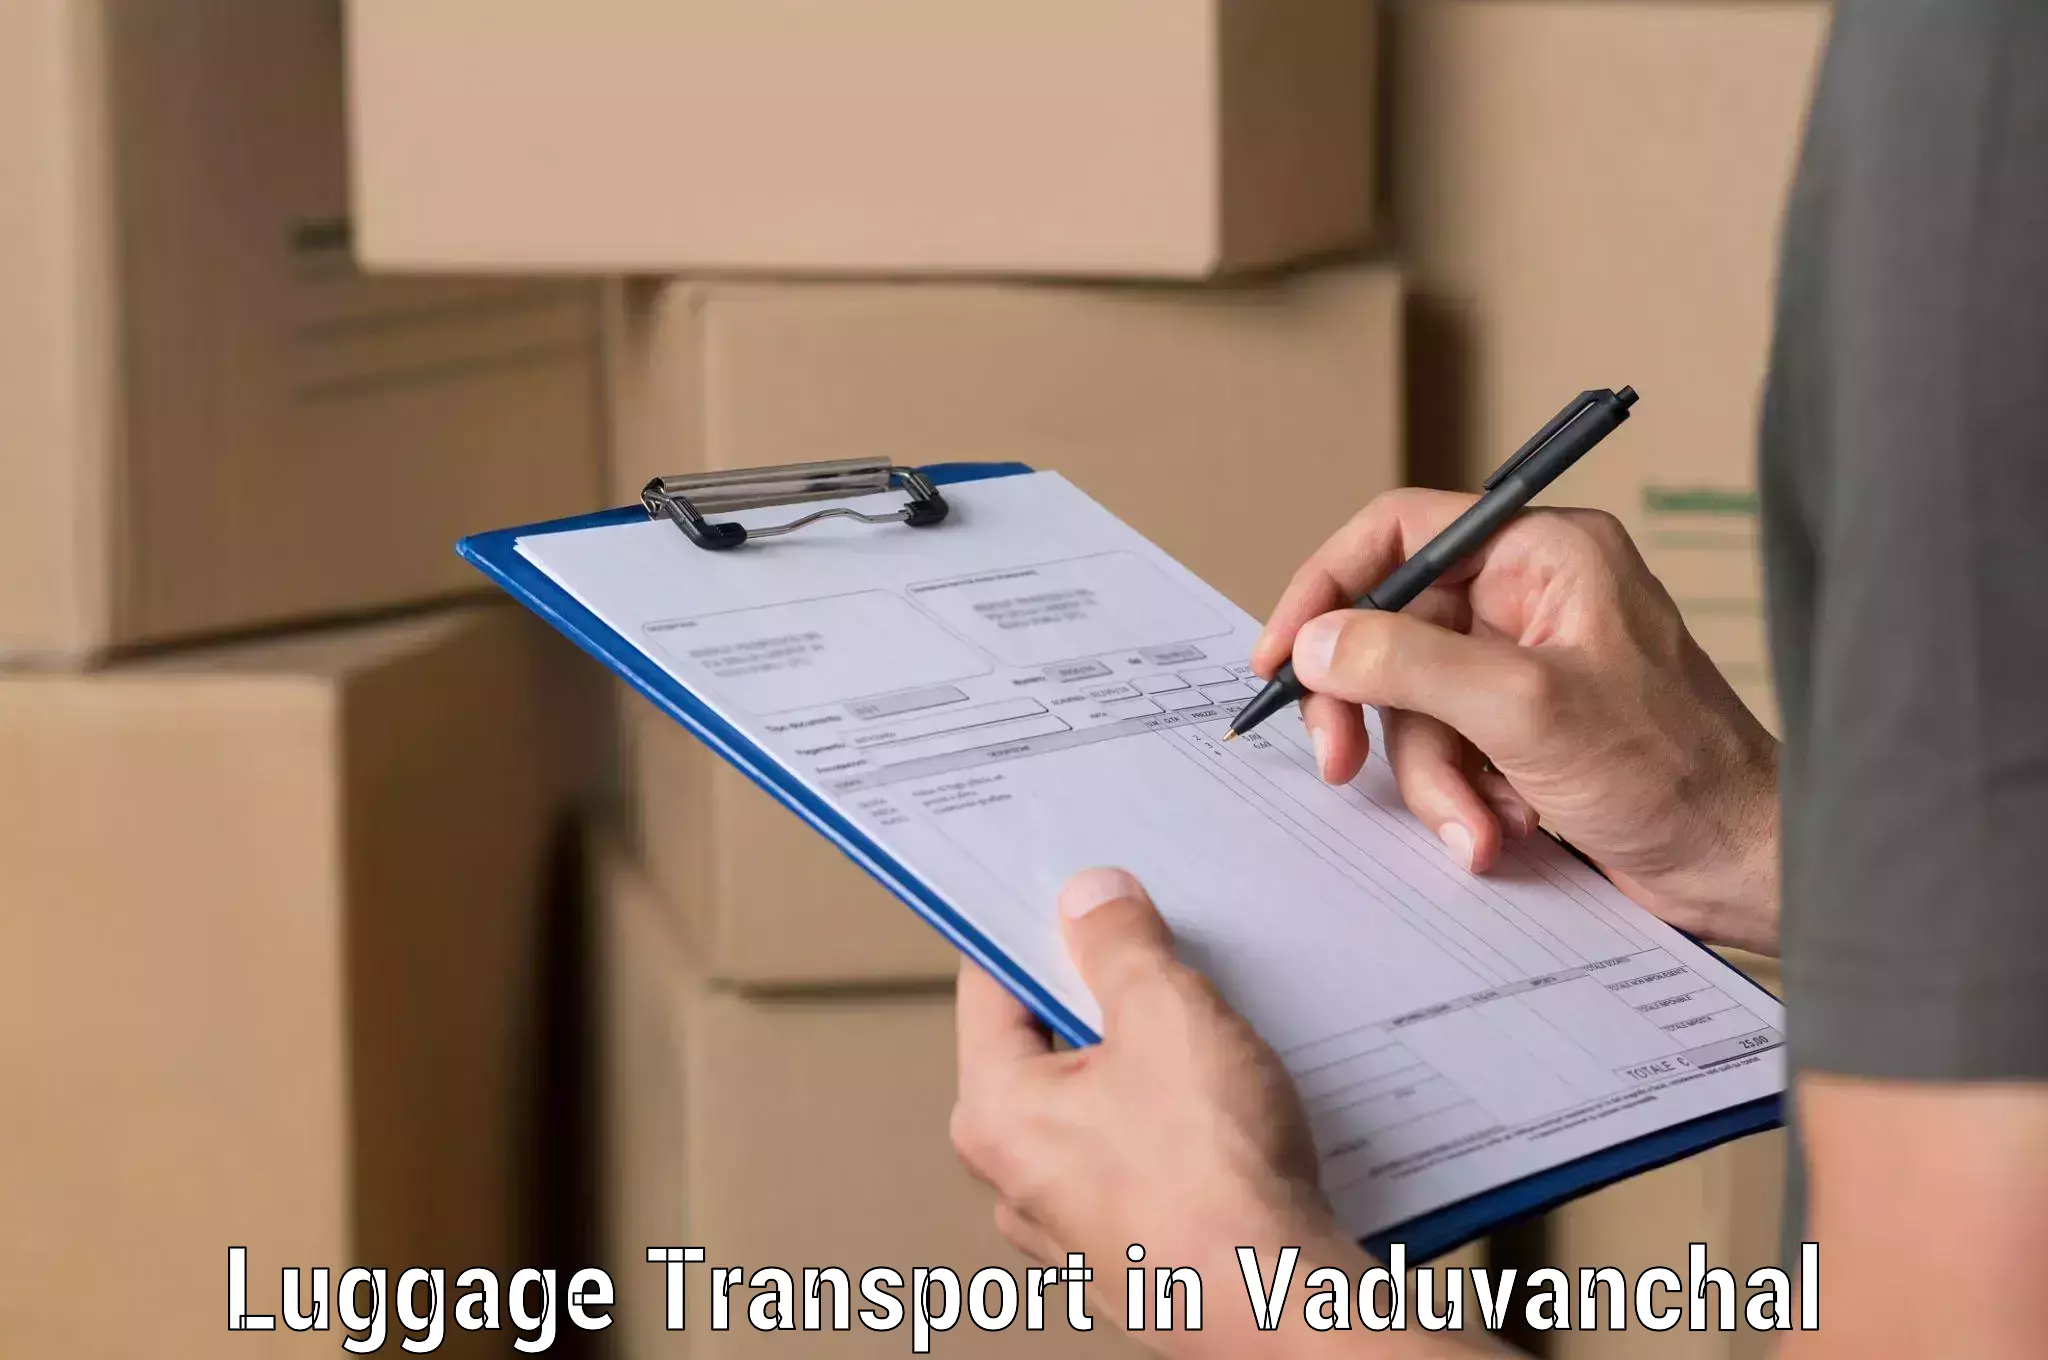 Luggage transport service in Vaduvanchal